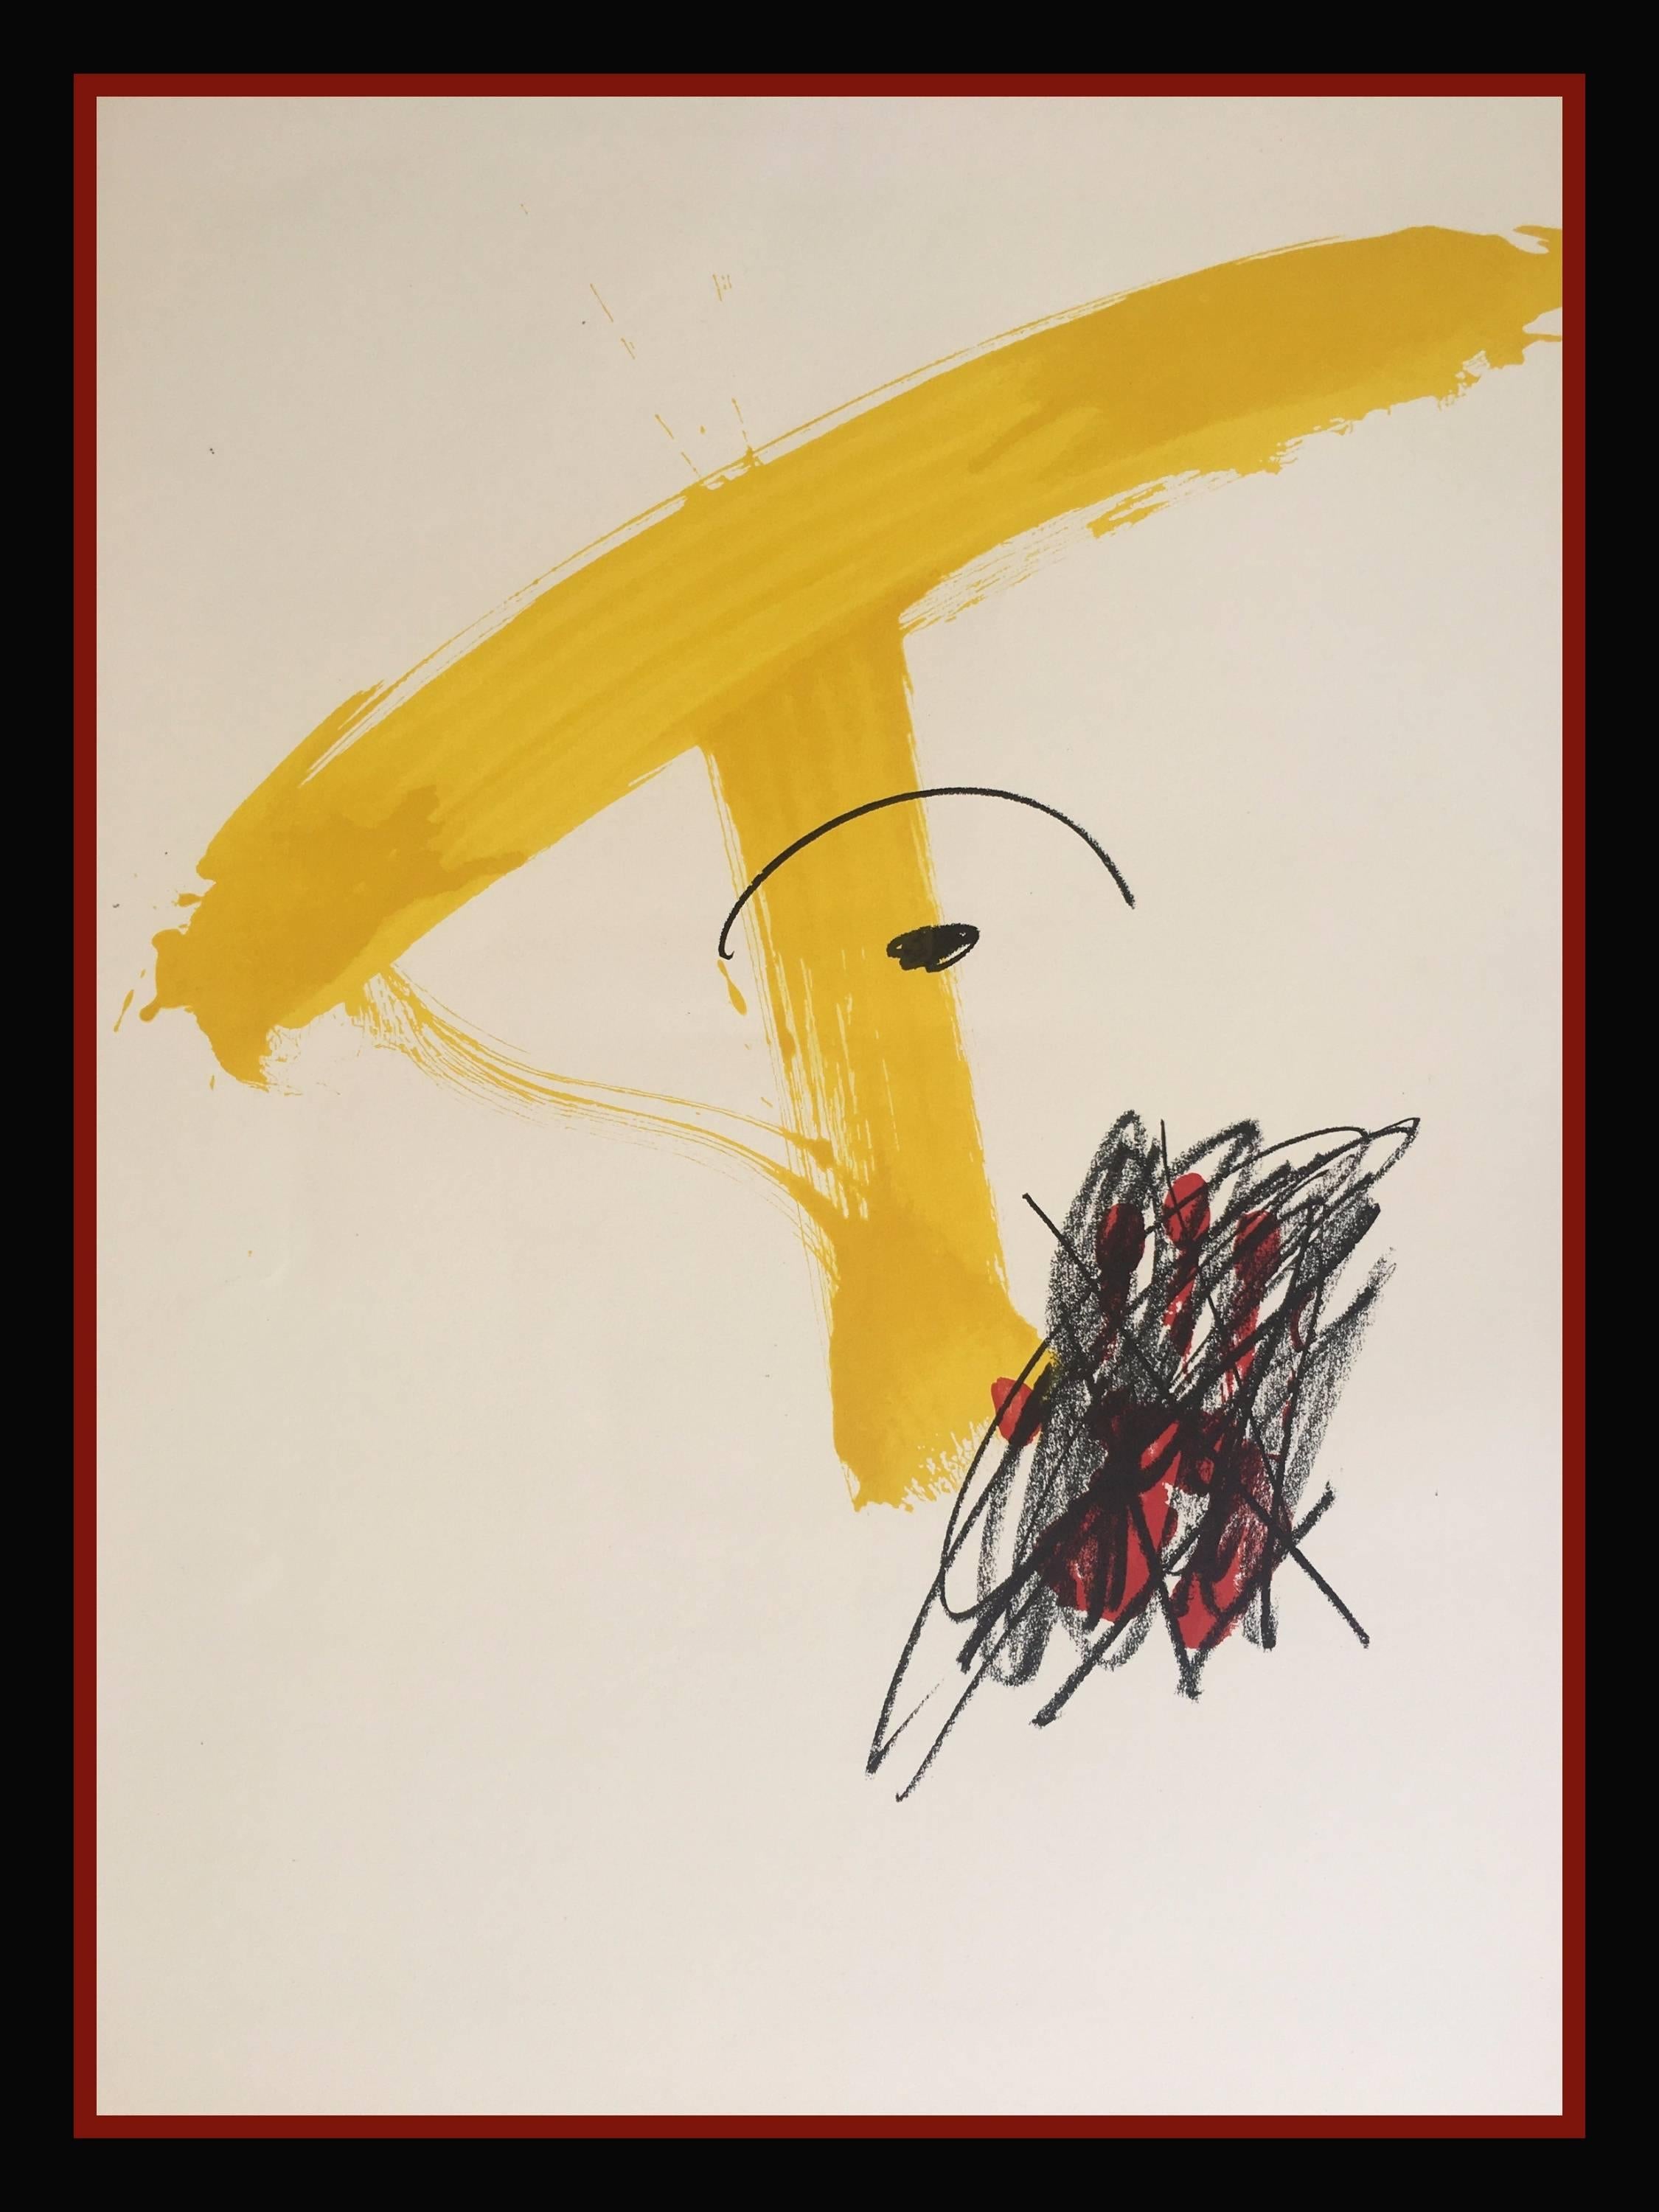 Antoni Tàpies Abstract Print - Tapies 93  Black  Yellow  Vertical. 1974 original lithography painting